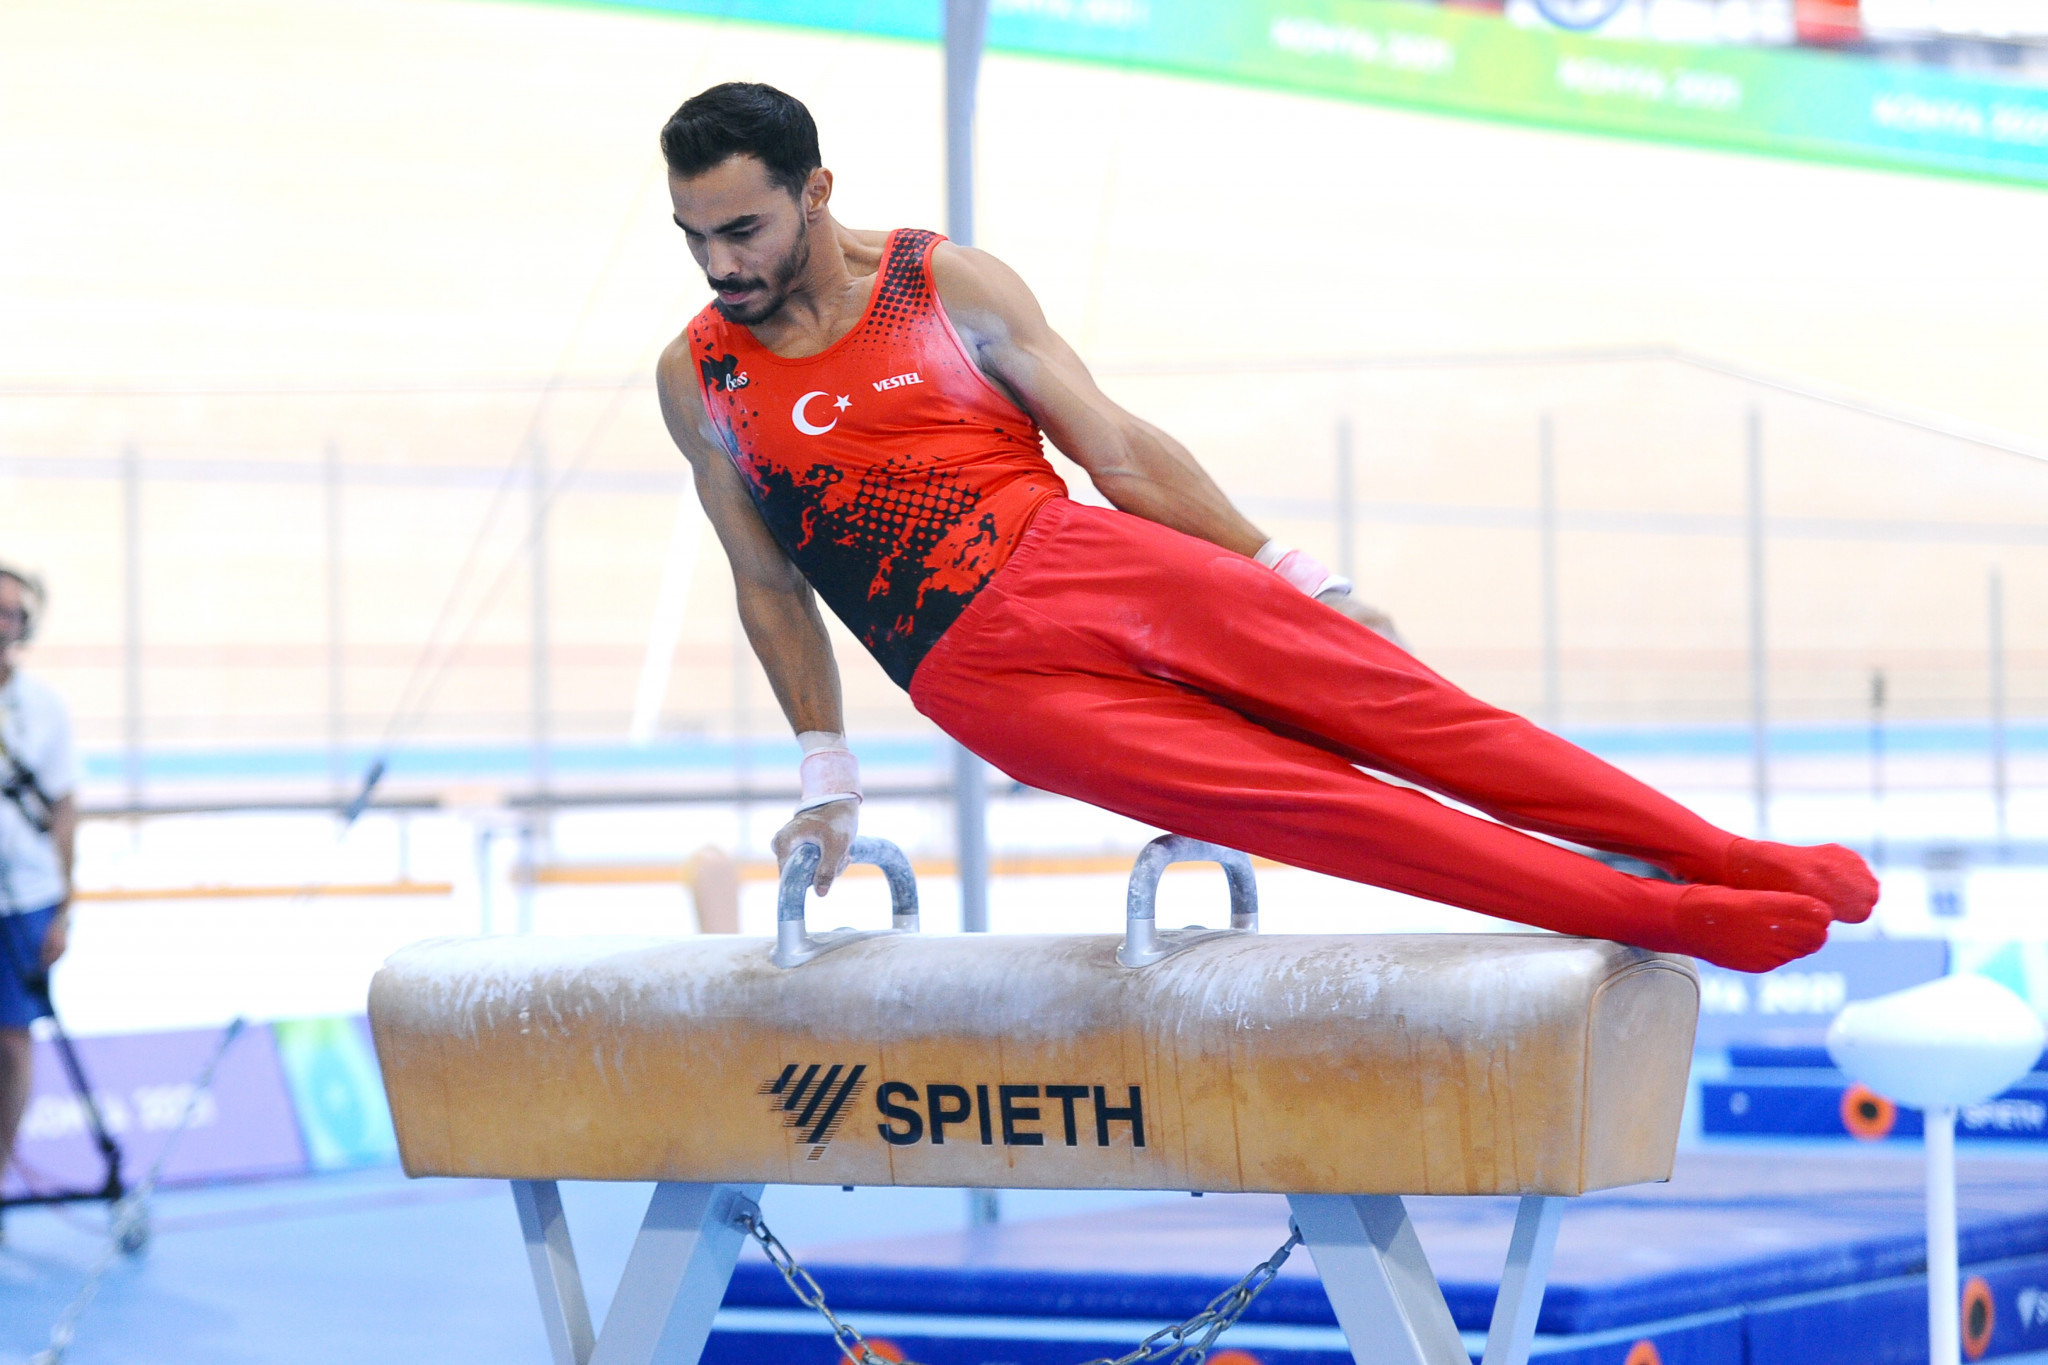 Ferhat Arican of Turkey added another pommel horse medal to his glittering collection of medals ©Konya 2021